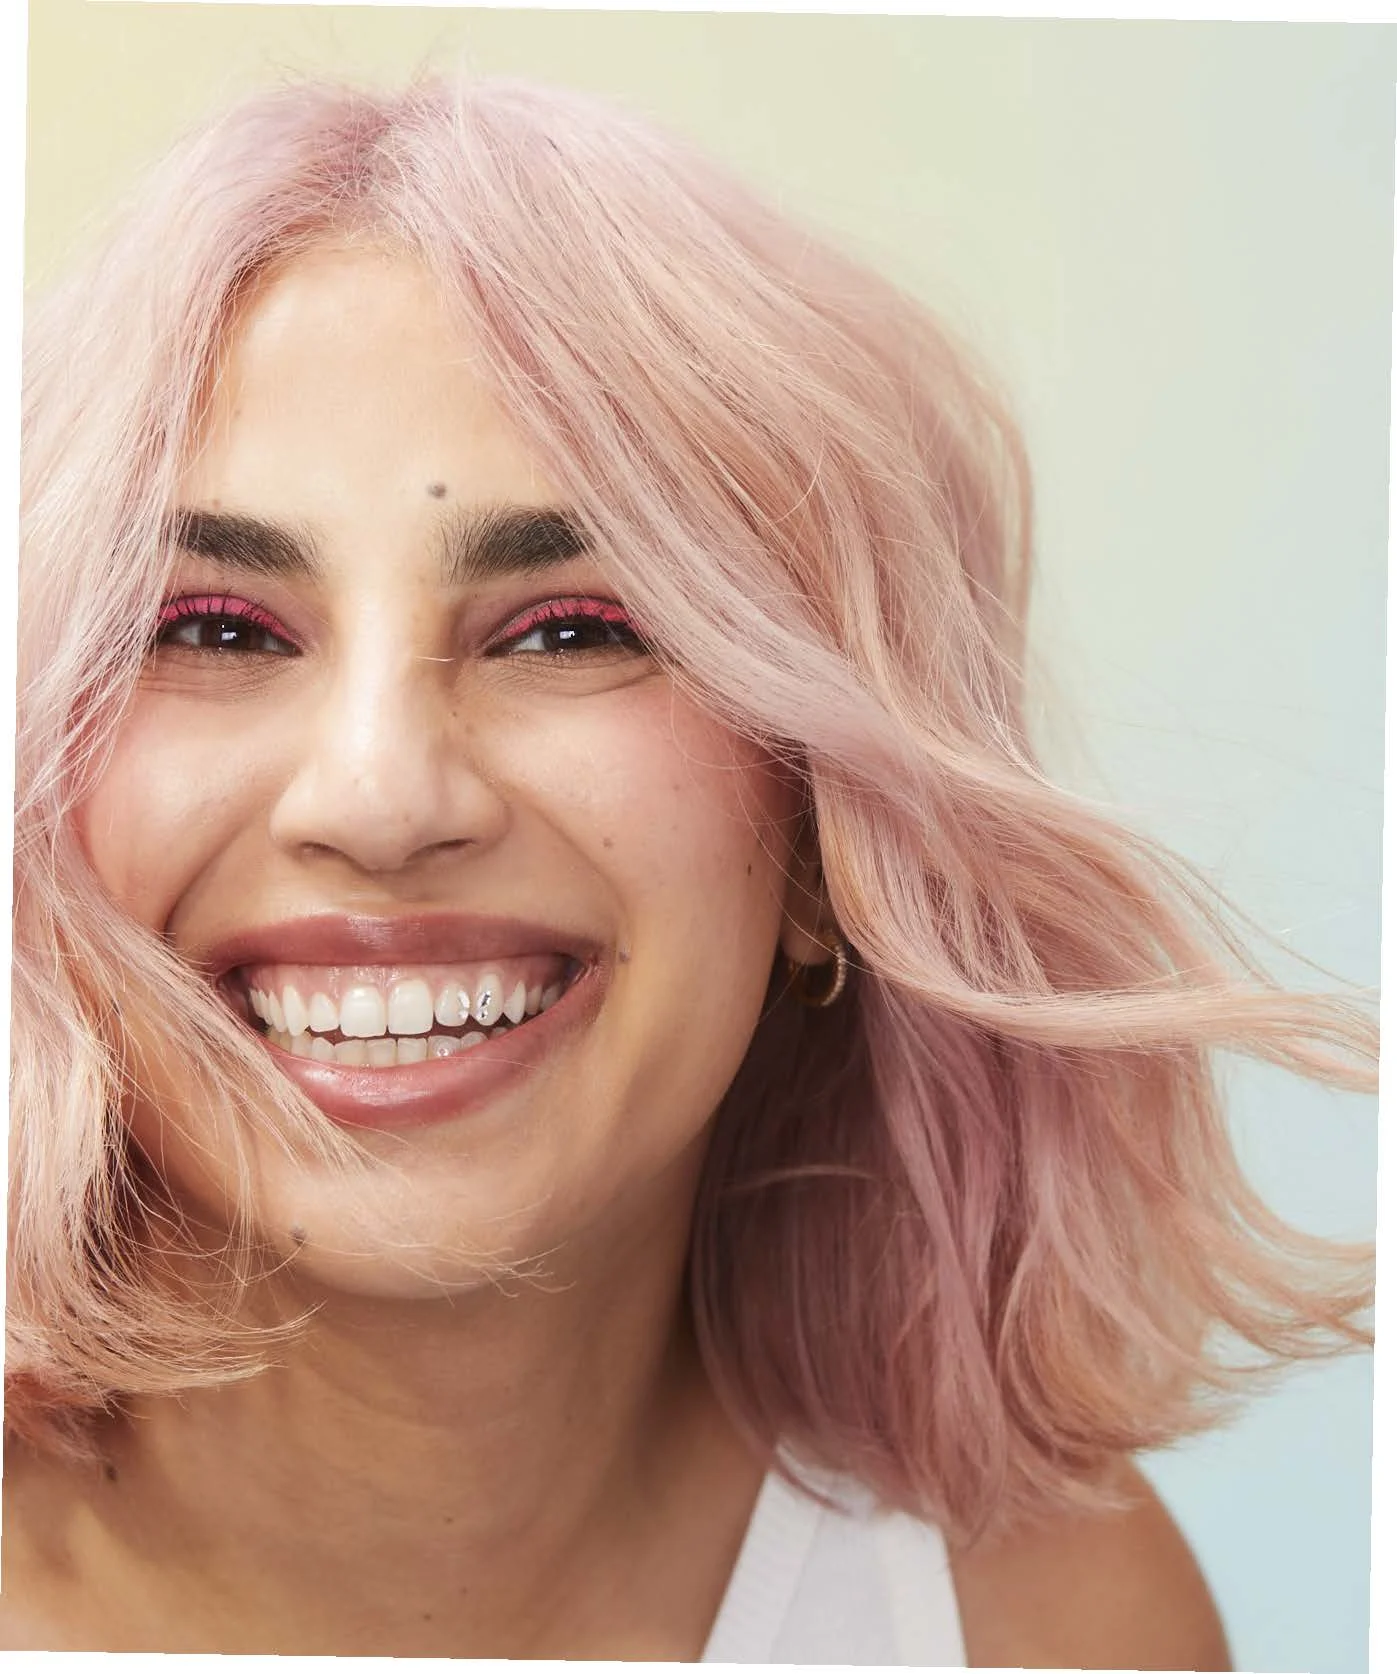 Brassy Hair? Here's How to Care for Your Colored Locks